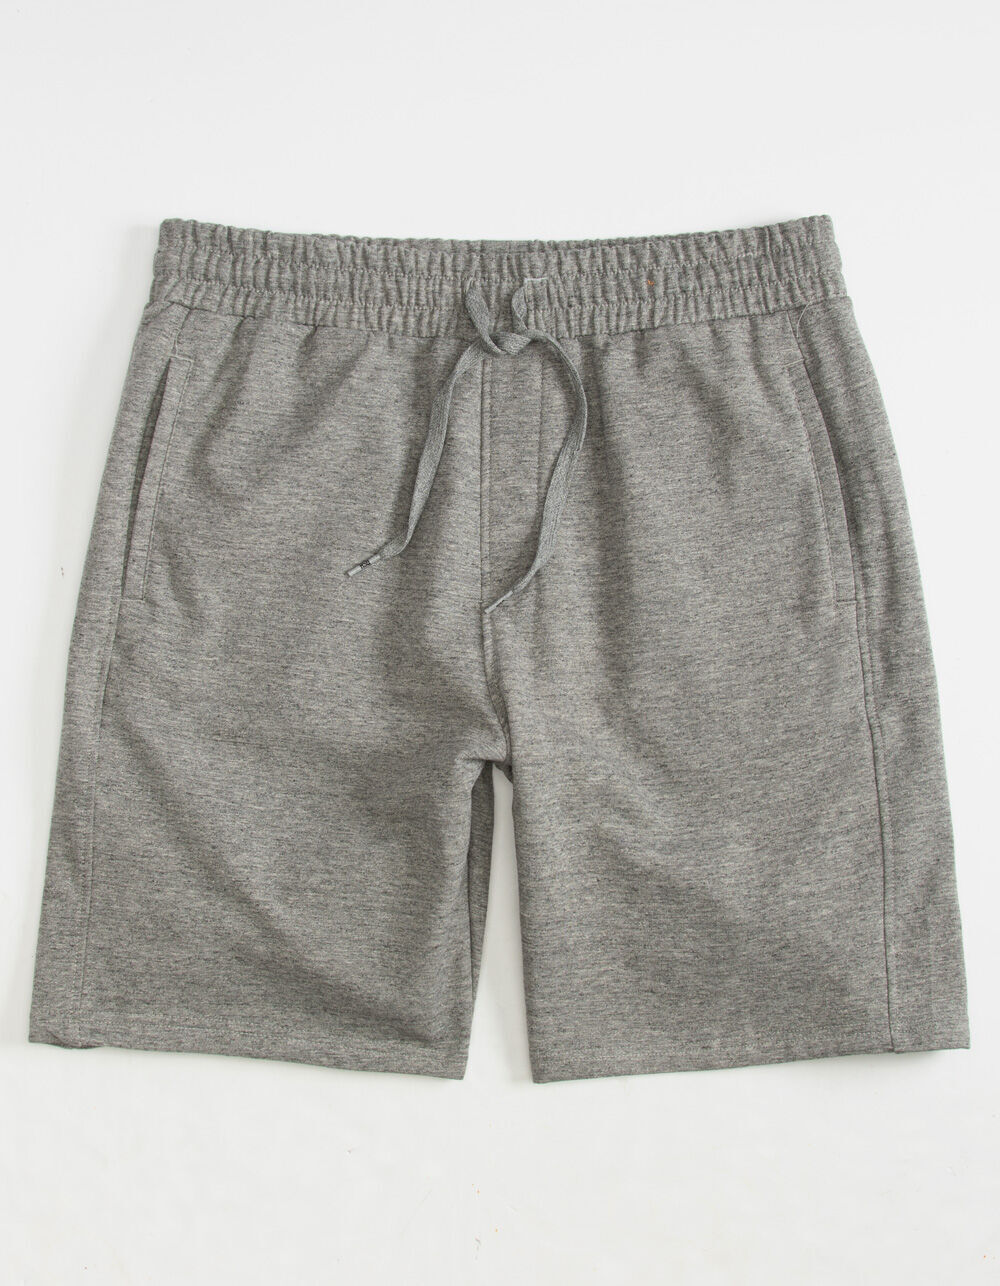 Tillys Mens Shorts GRAY Sweat Heather HEATHER - RSQ Gray |